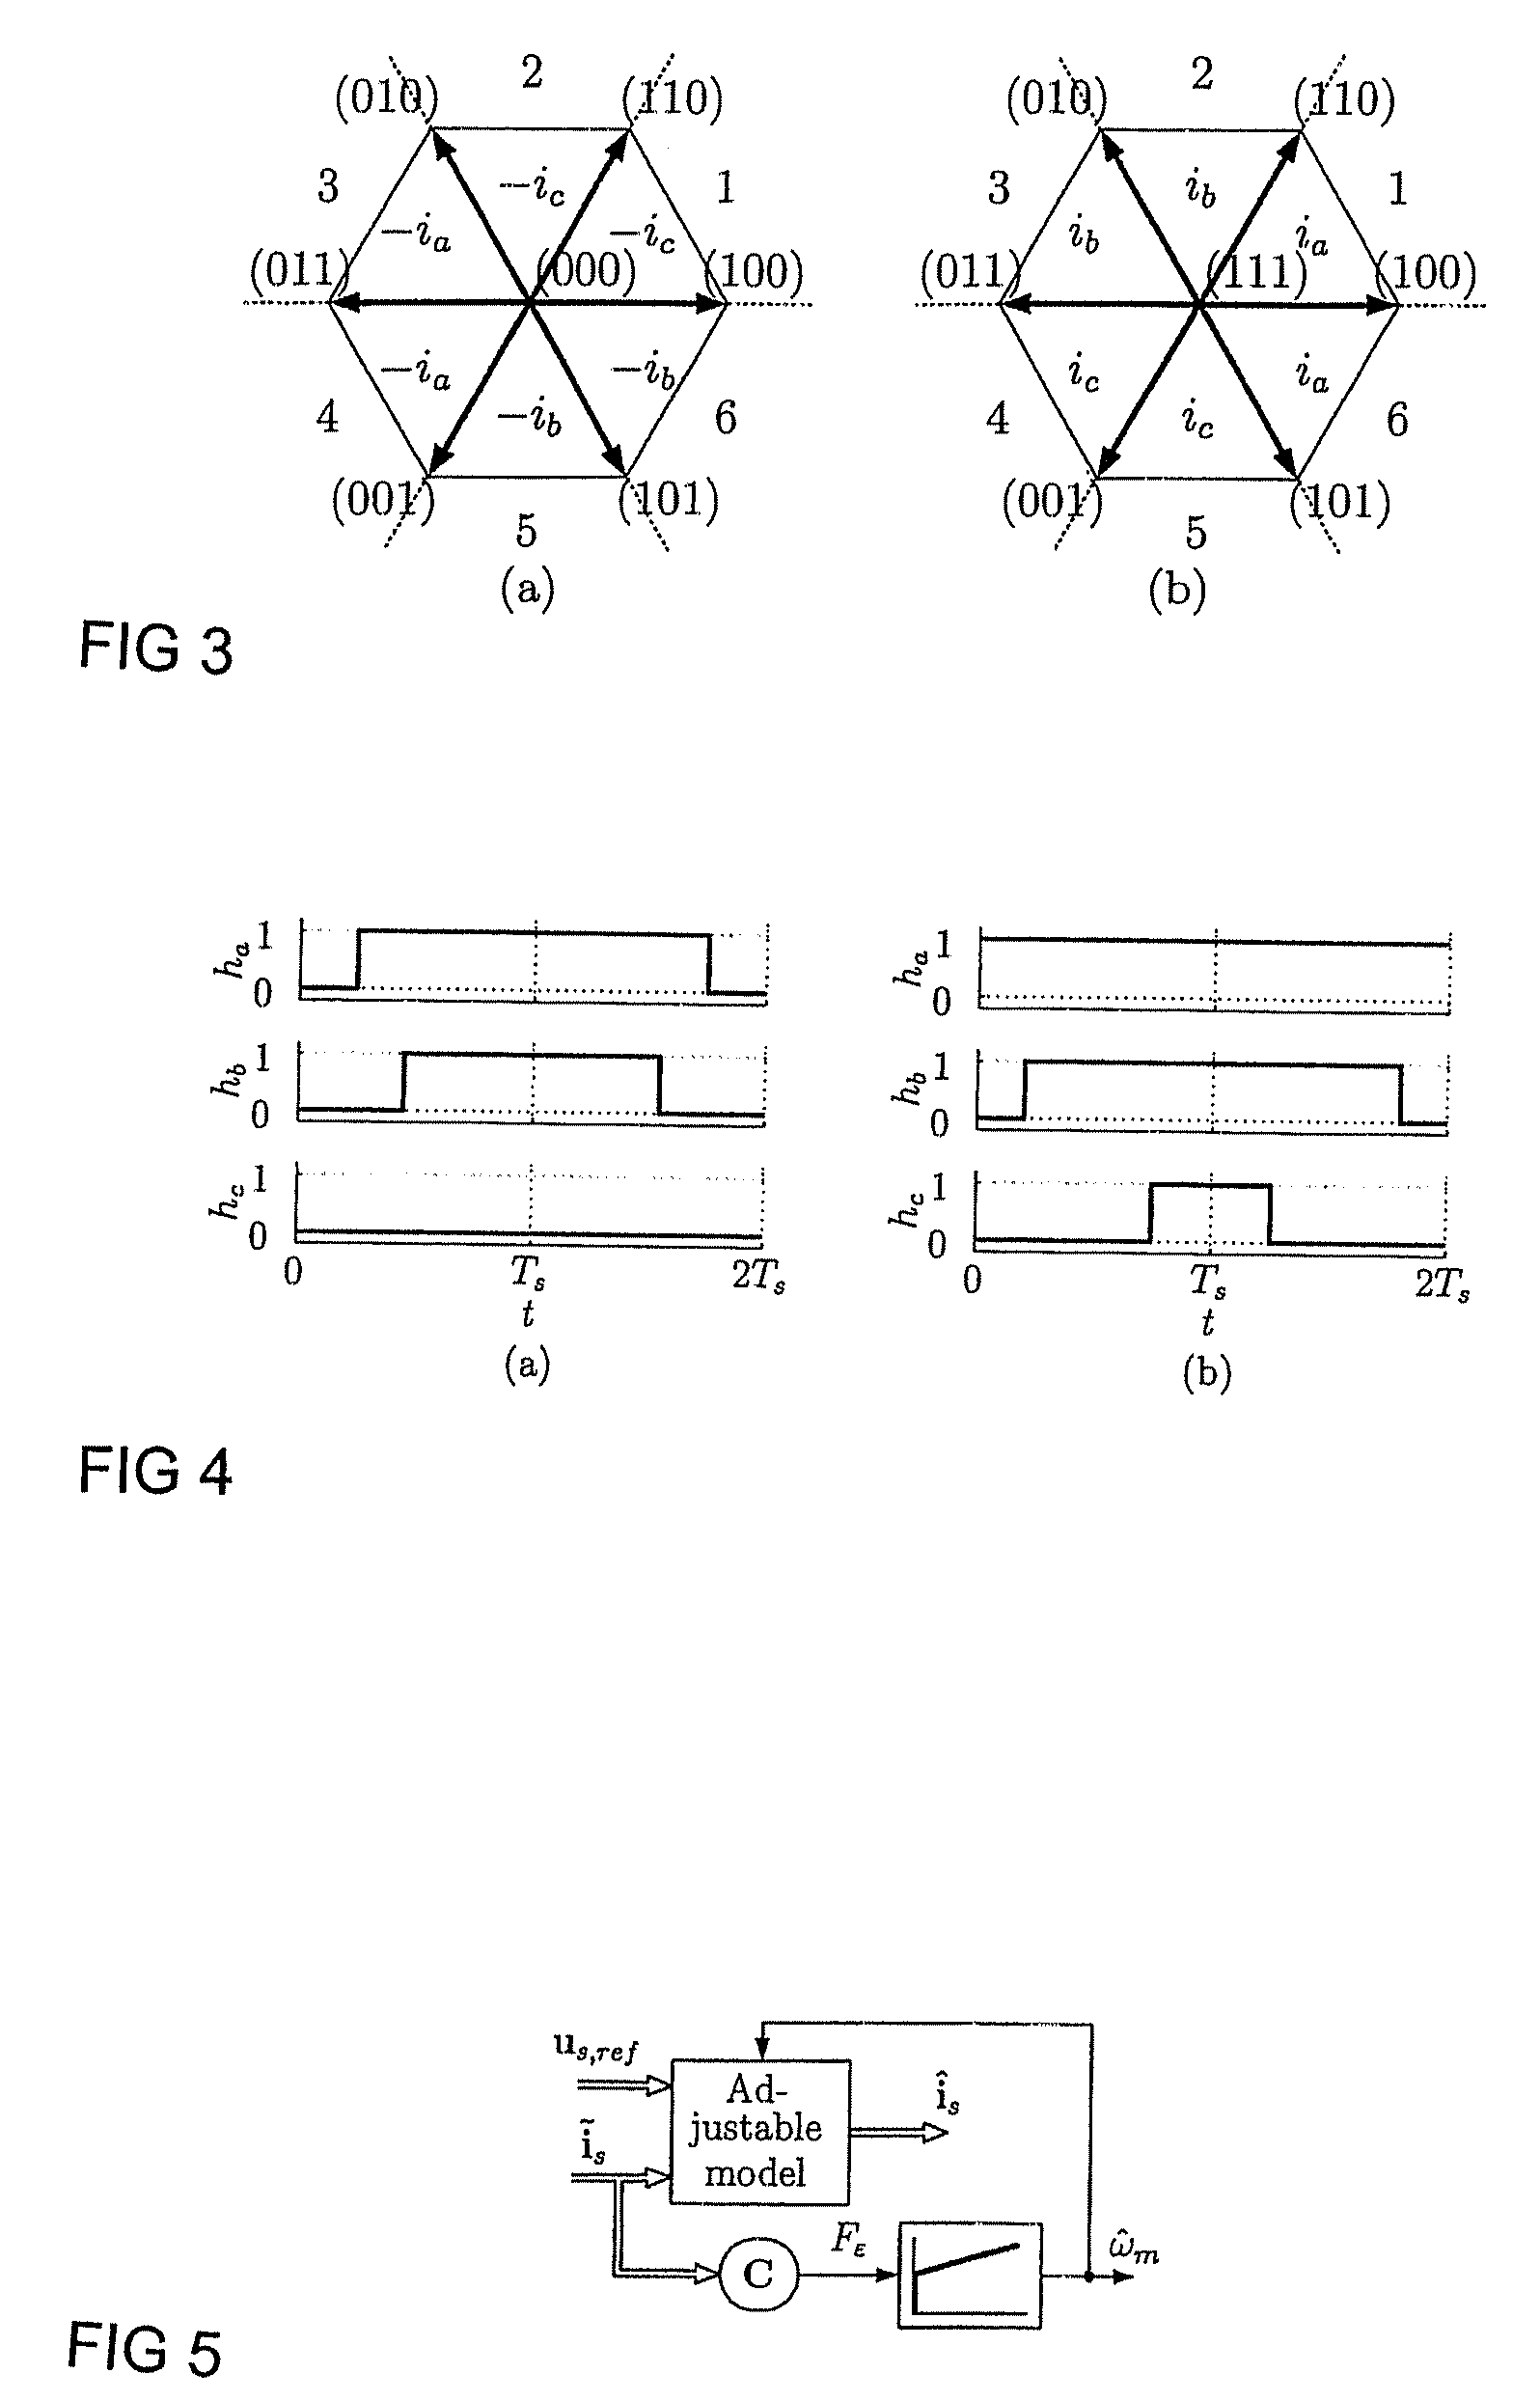 Method for sensorless estimation of rotor speed and position of a permanent magnet synchronous machine